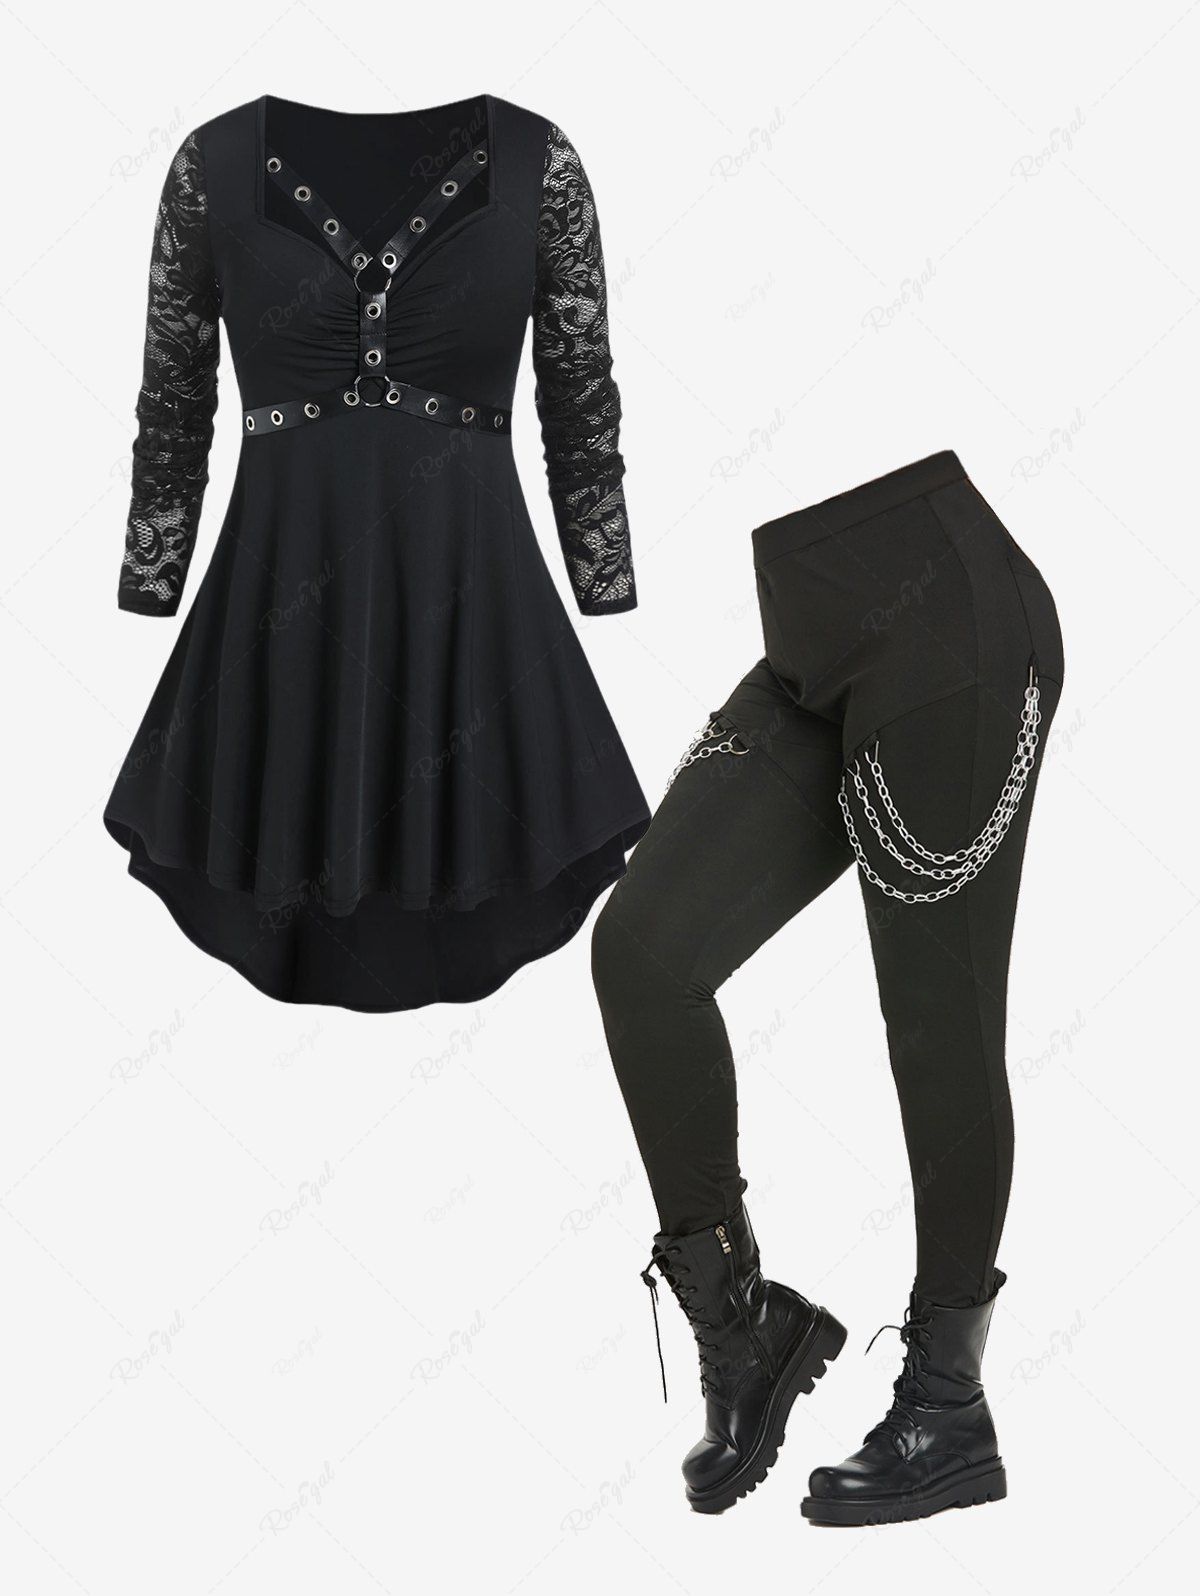 Trendy Lace Sleeve Harness Grommets High Low Tee and Chain Pants Gothic Outfit  